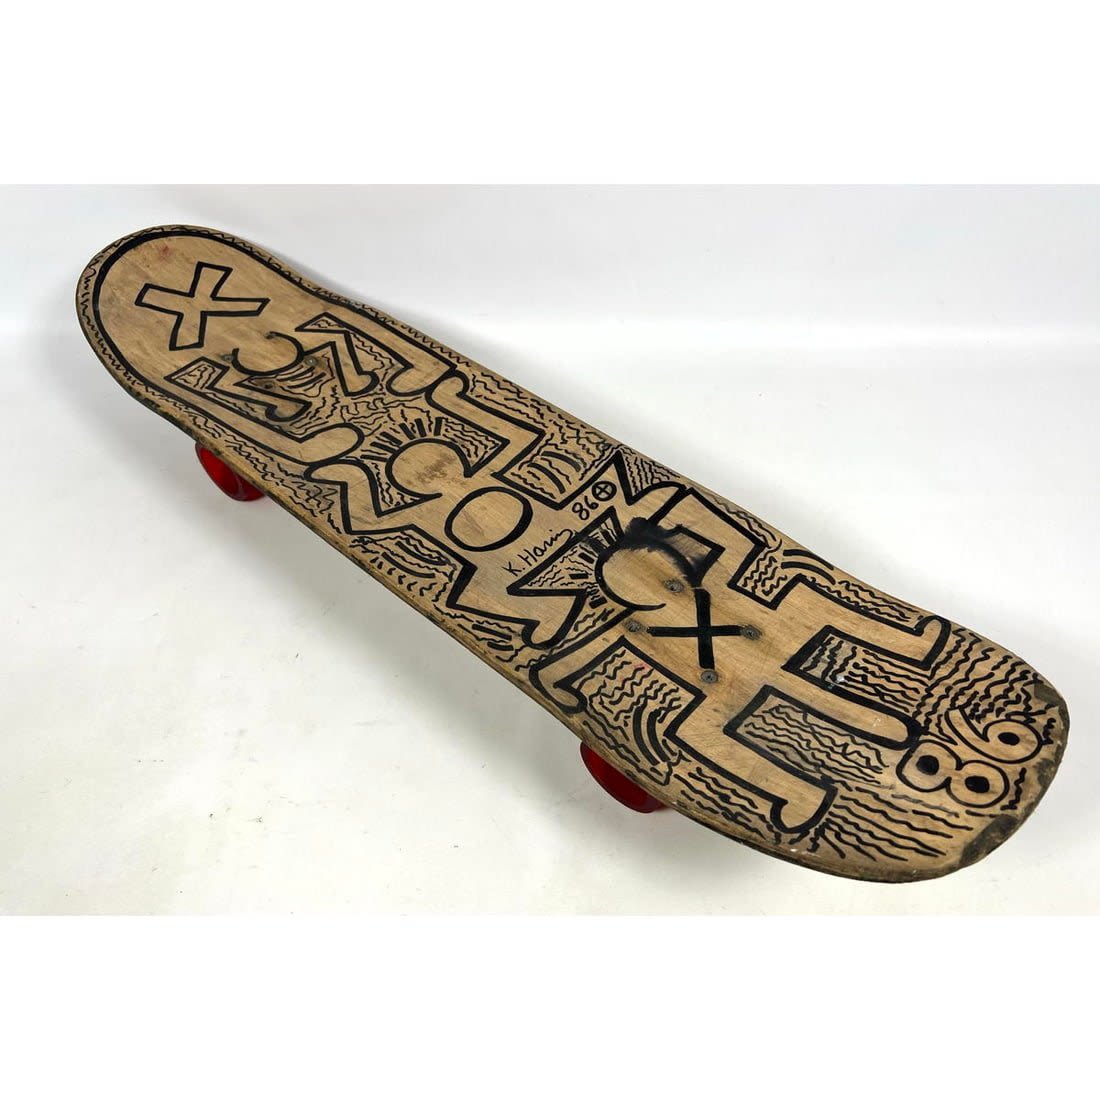 Vintage Skateboard painted in the 362a6c